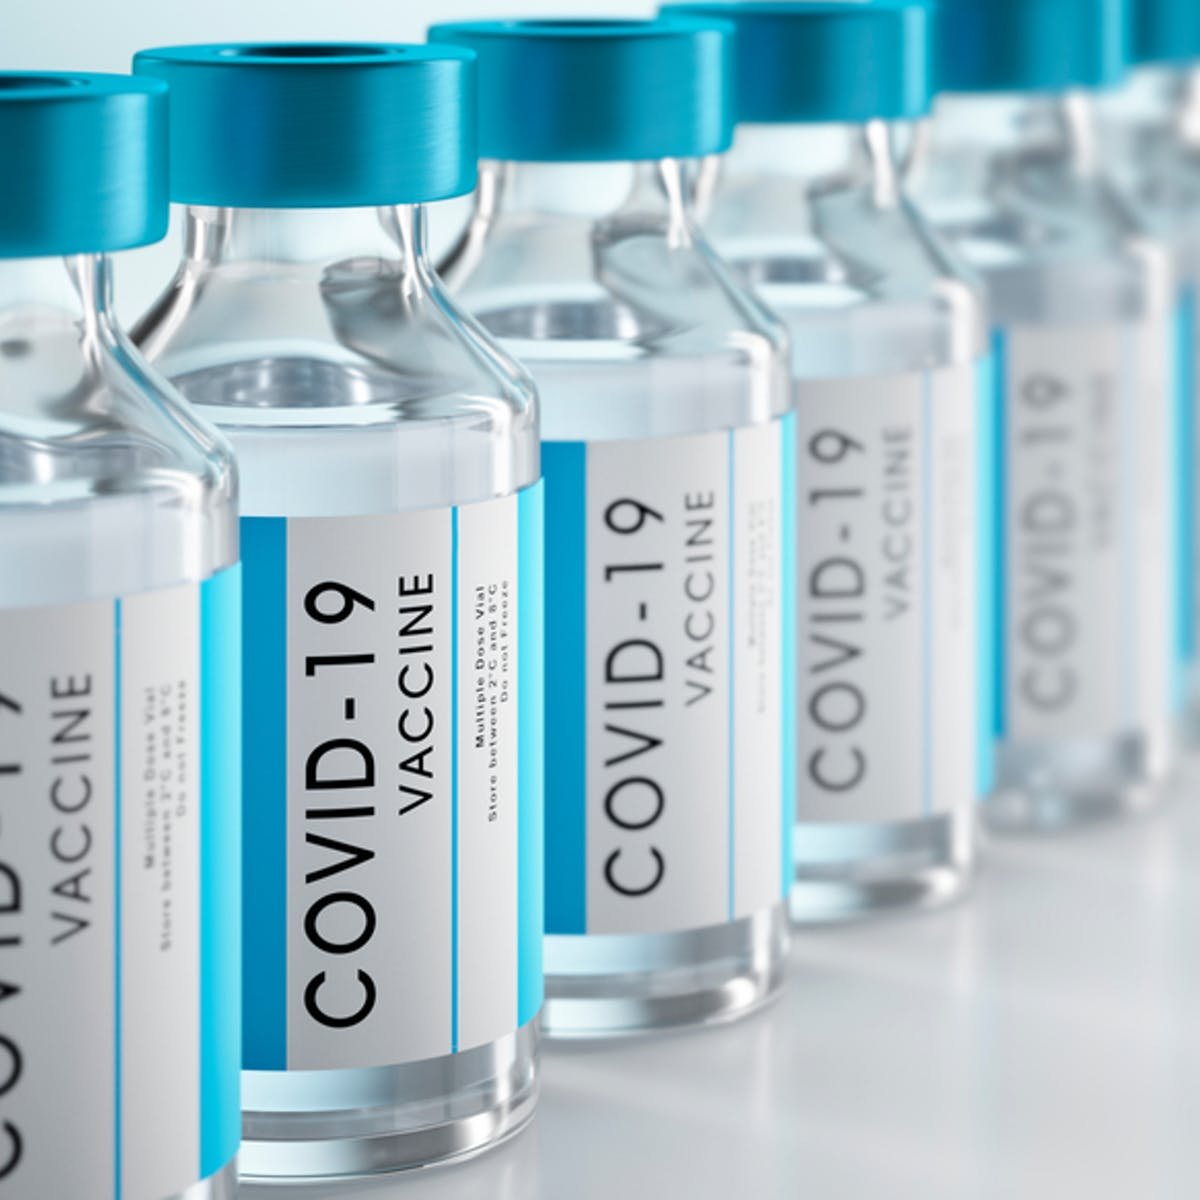 Benefits Of Getting a COVID-19 Vaccine